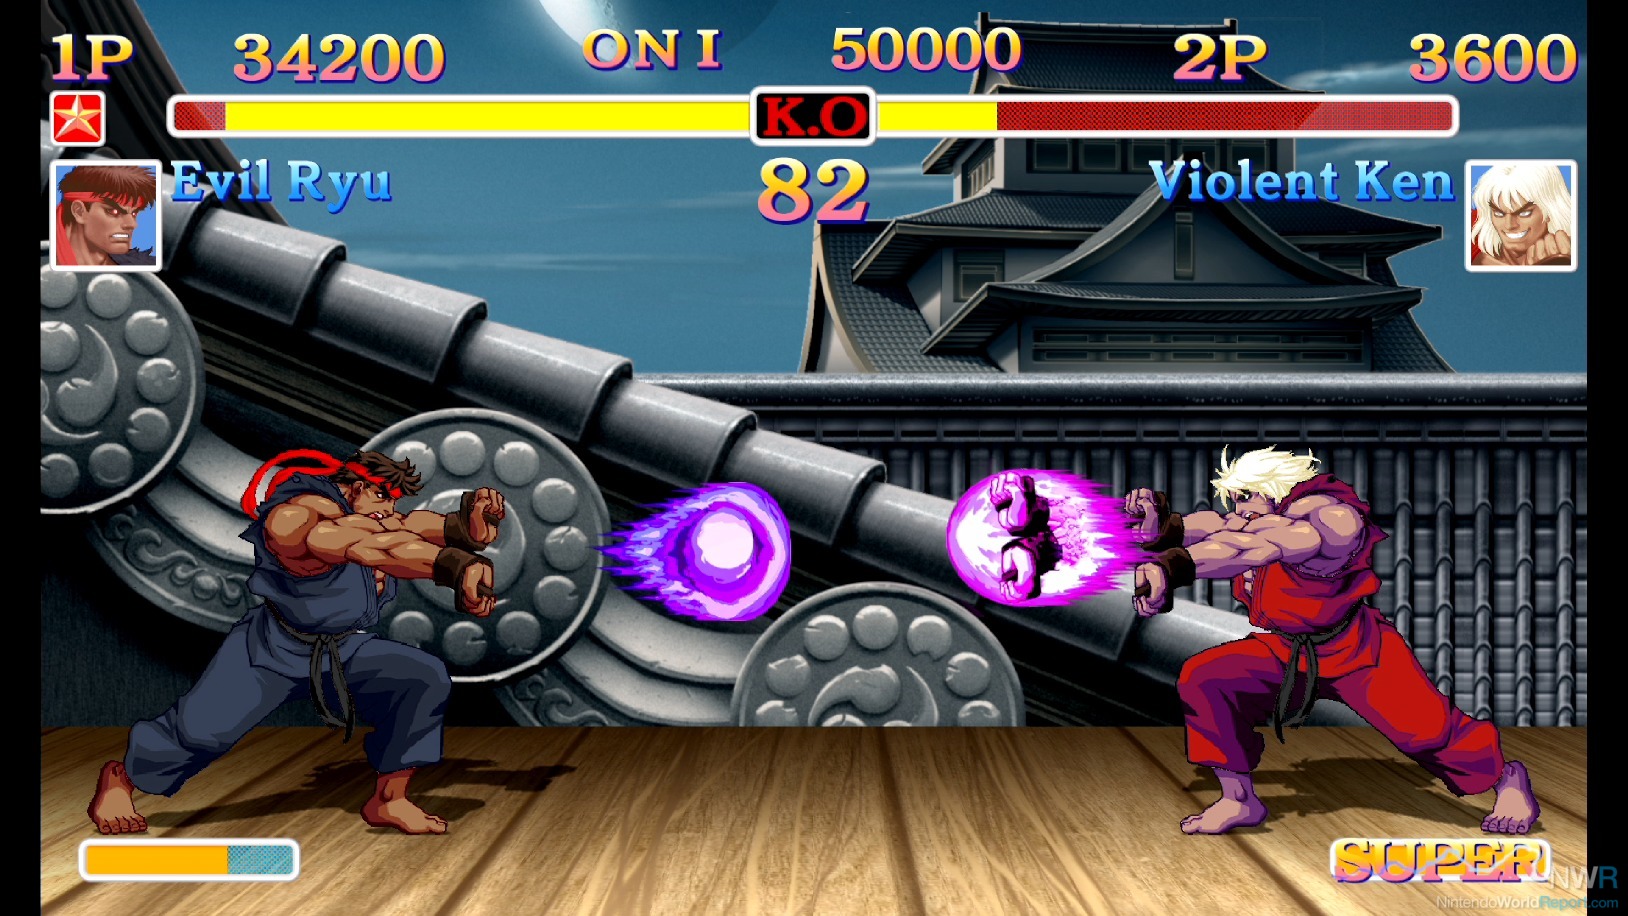 Why The Hadoken Are There So Many Street Fighter II Games? - The